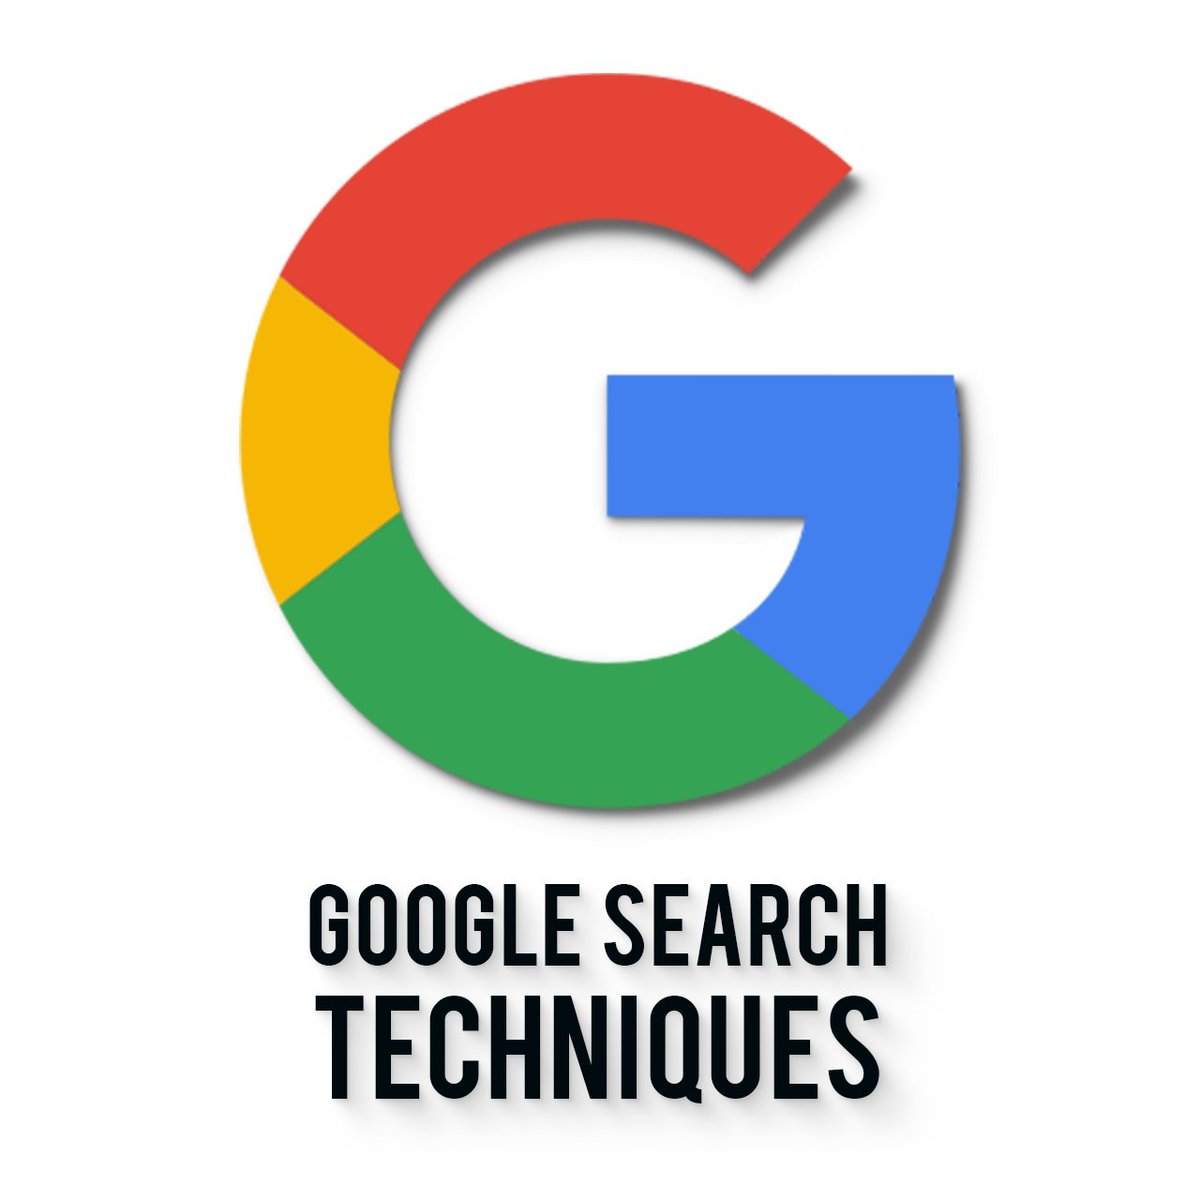 You can find almost everything for free on the internet but,

You must learn the techniques and master 'Google Search'

Bookmark now🔖